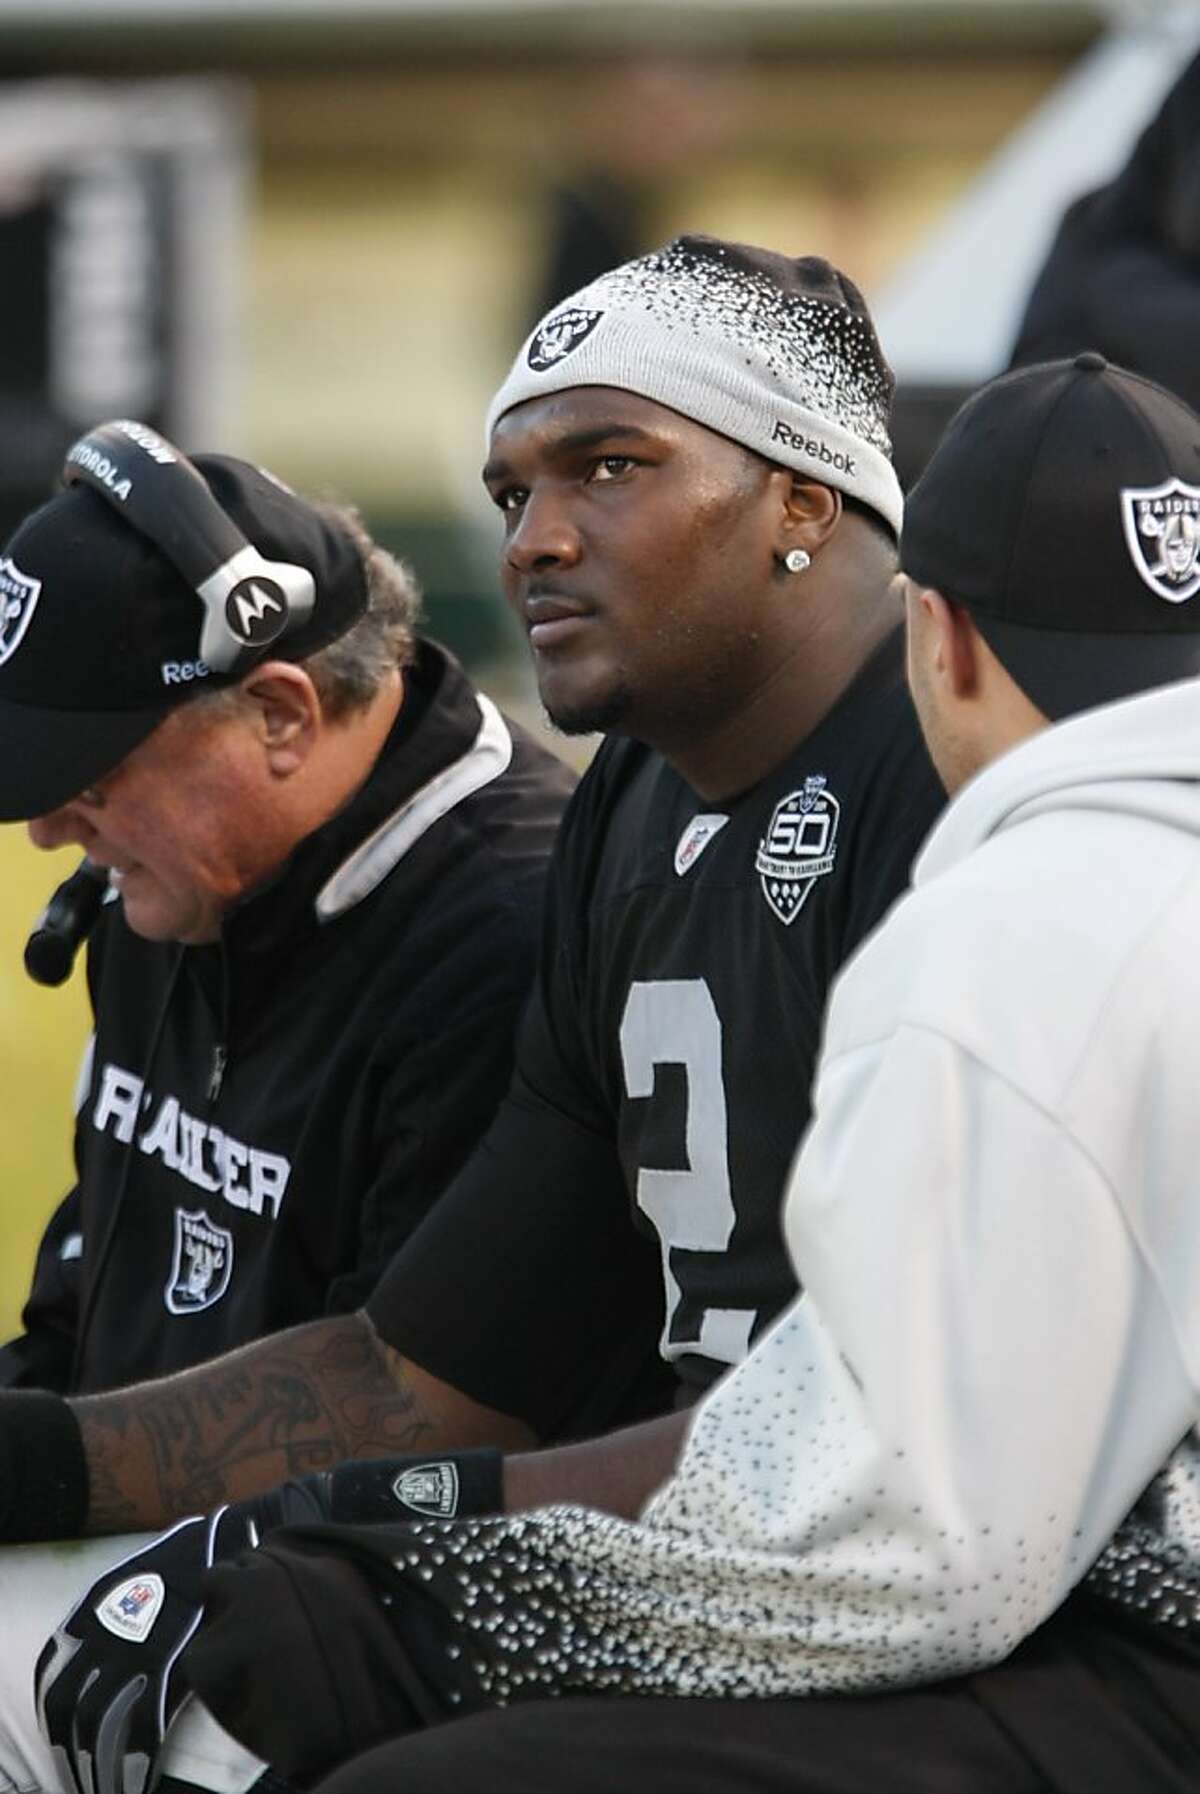 FILE - This Jan. 3, 2010, file photo shows Oakland Raiders quarterback JaMarcus Russell (2) on the sidelines in the fourth quarter of an NFL football game against the Baltimore Ravens, in Oakland, Calif. As Russell struggled through the worst statistical season for an NFL quarterback in more than a decade, Oakland Raiders owner Al Davis preached patience. (AP Photo/Paul Sakuma, File) Ran on: 04-29-2010 JaMarcus Russell: Will he or wont he be at minicamp this week?